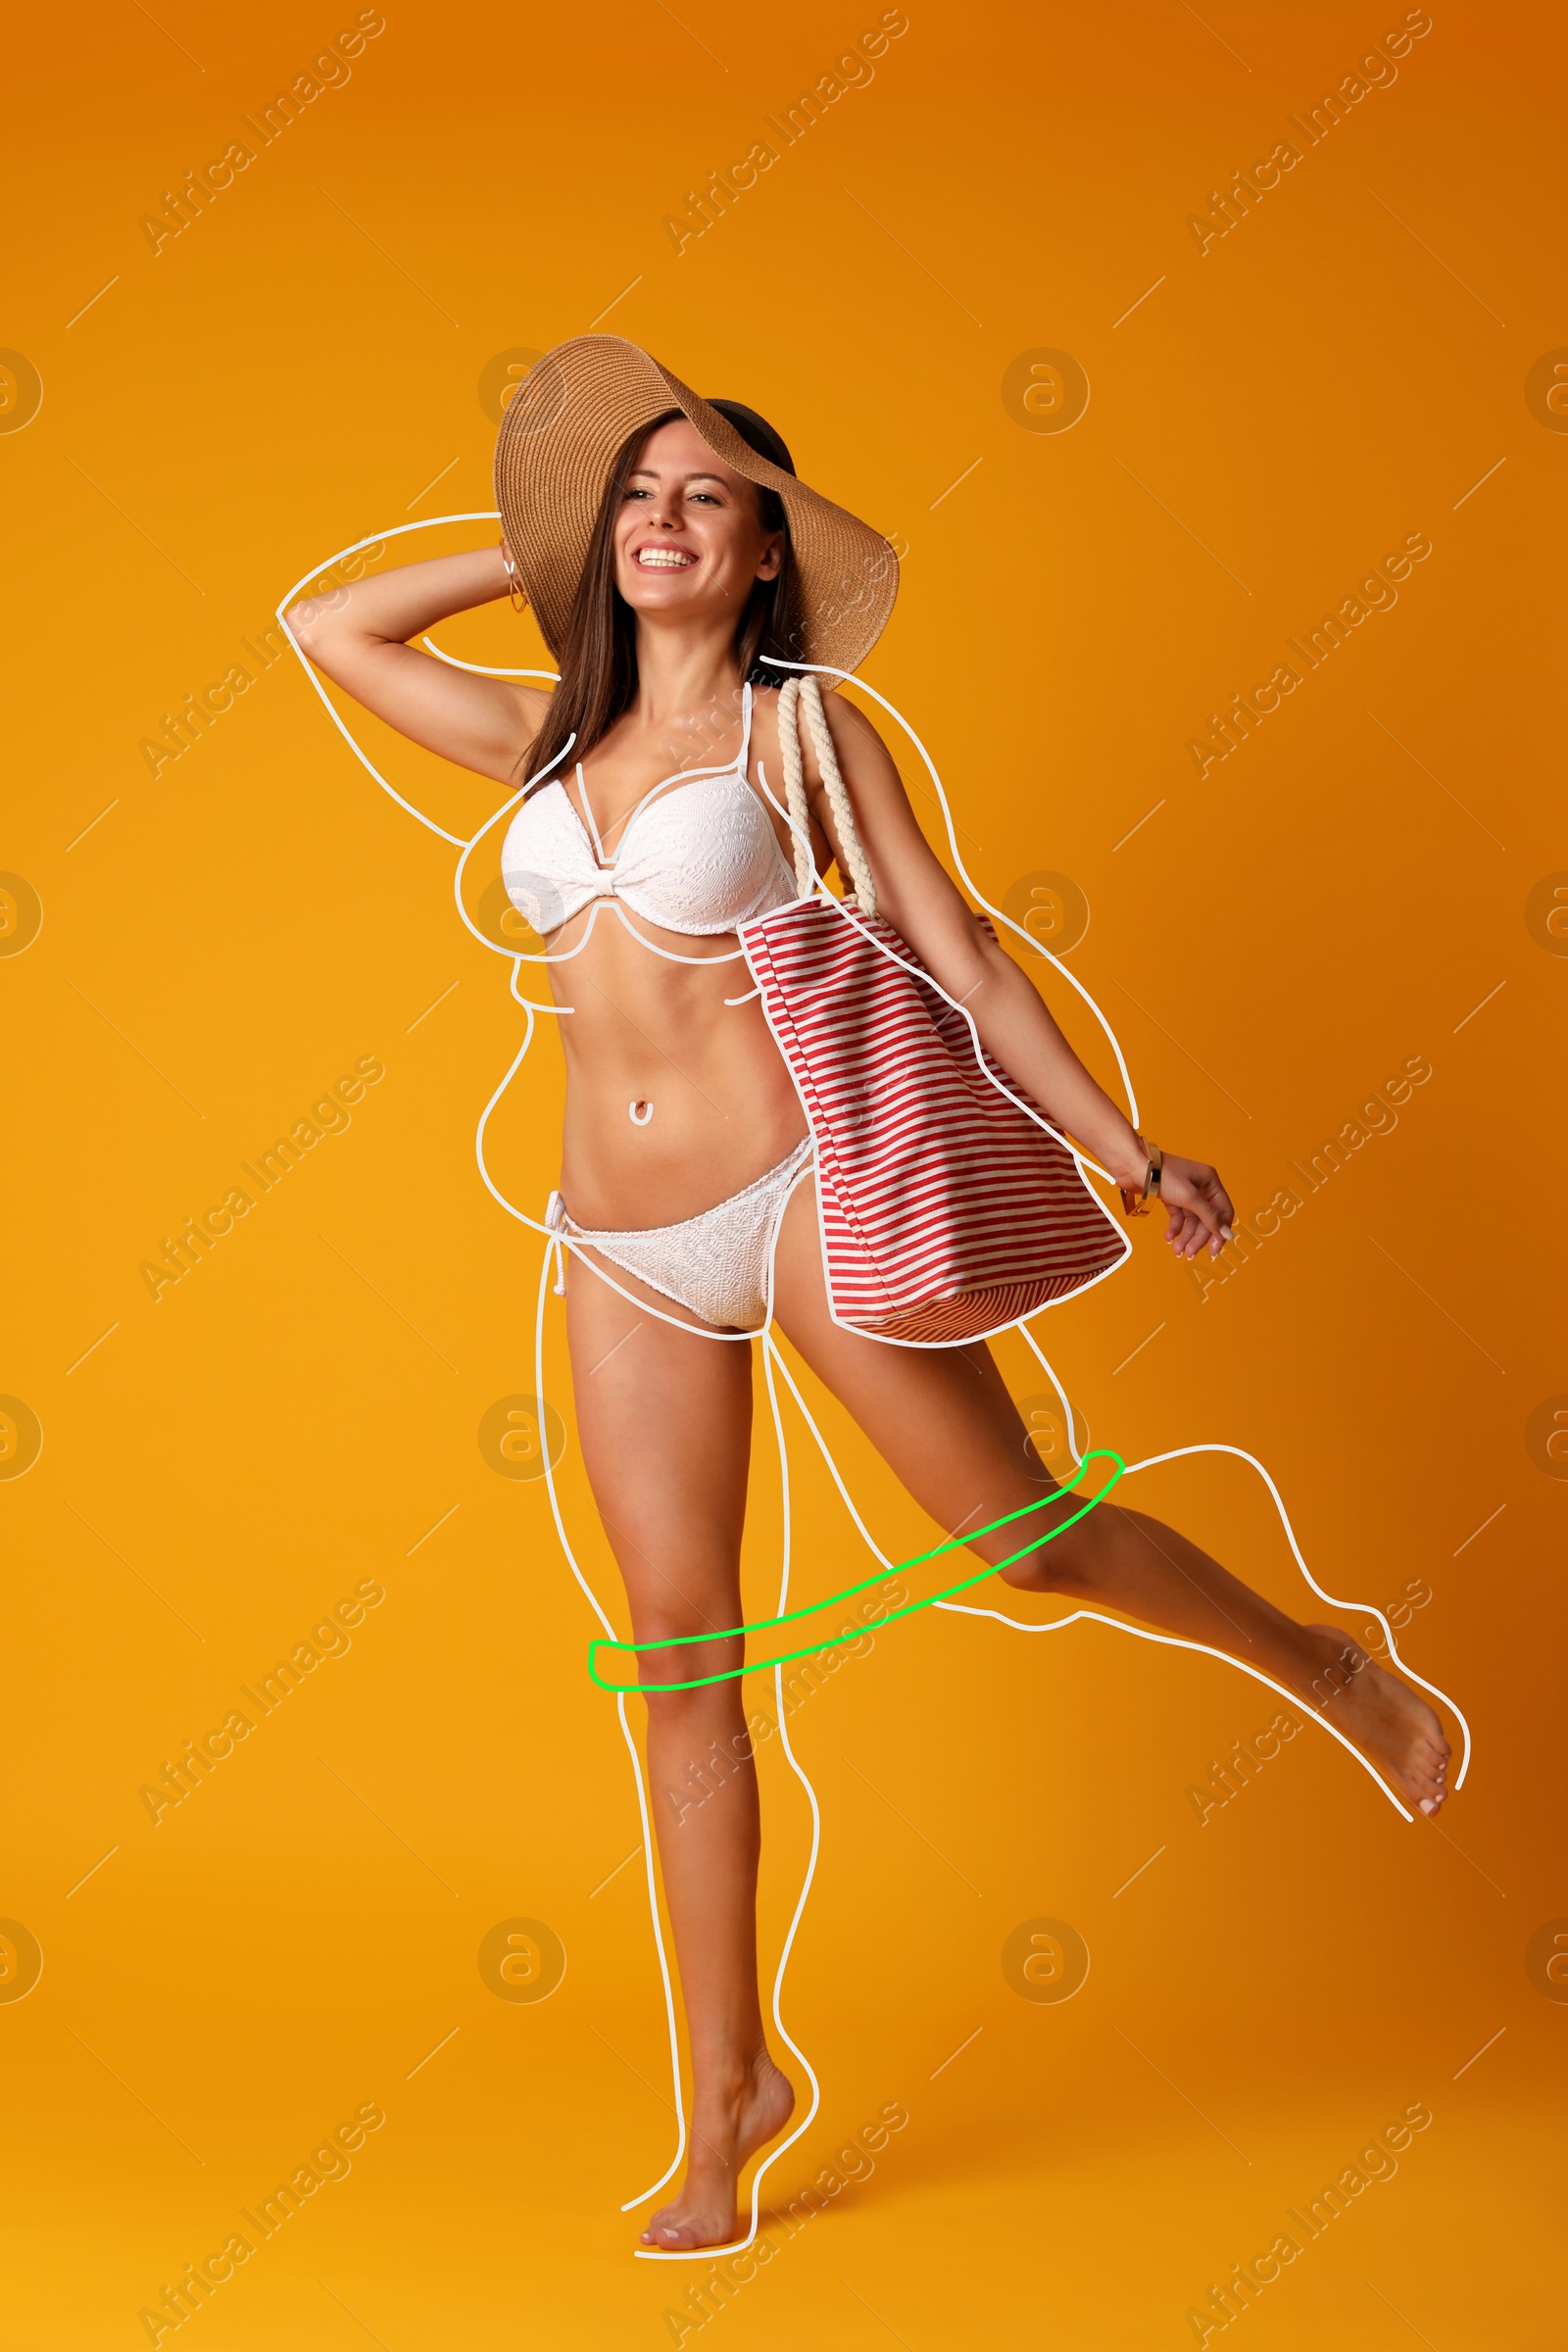 Image of Happy woman with slim body in swimsuit on orange background. Outline training with resistance band as her overweight figure before workout